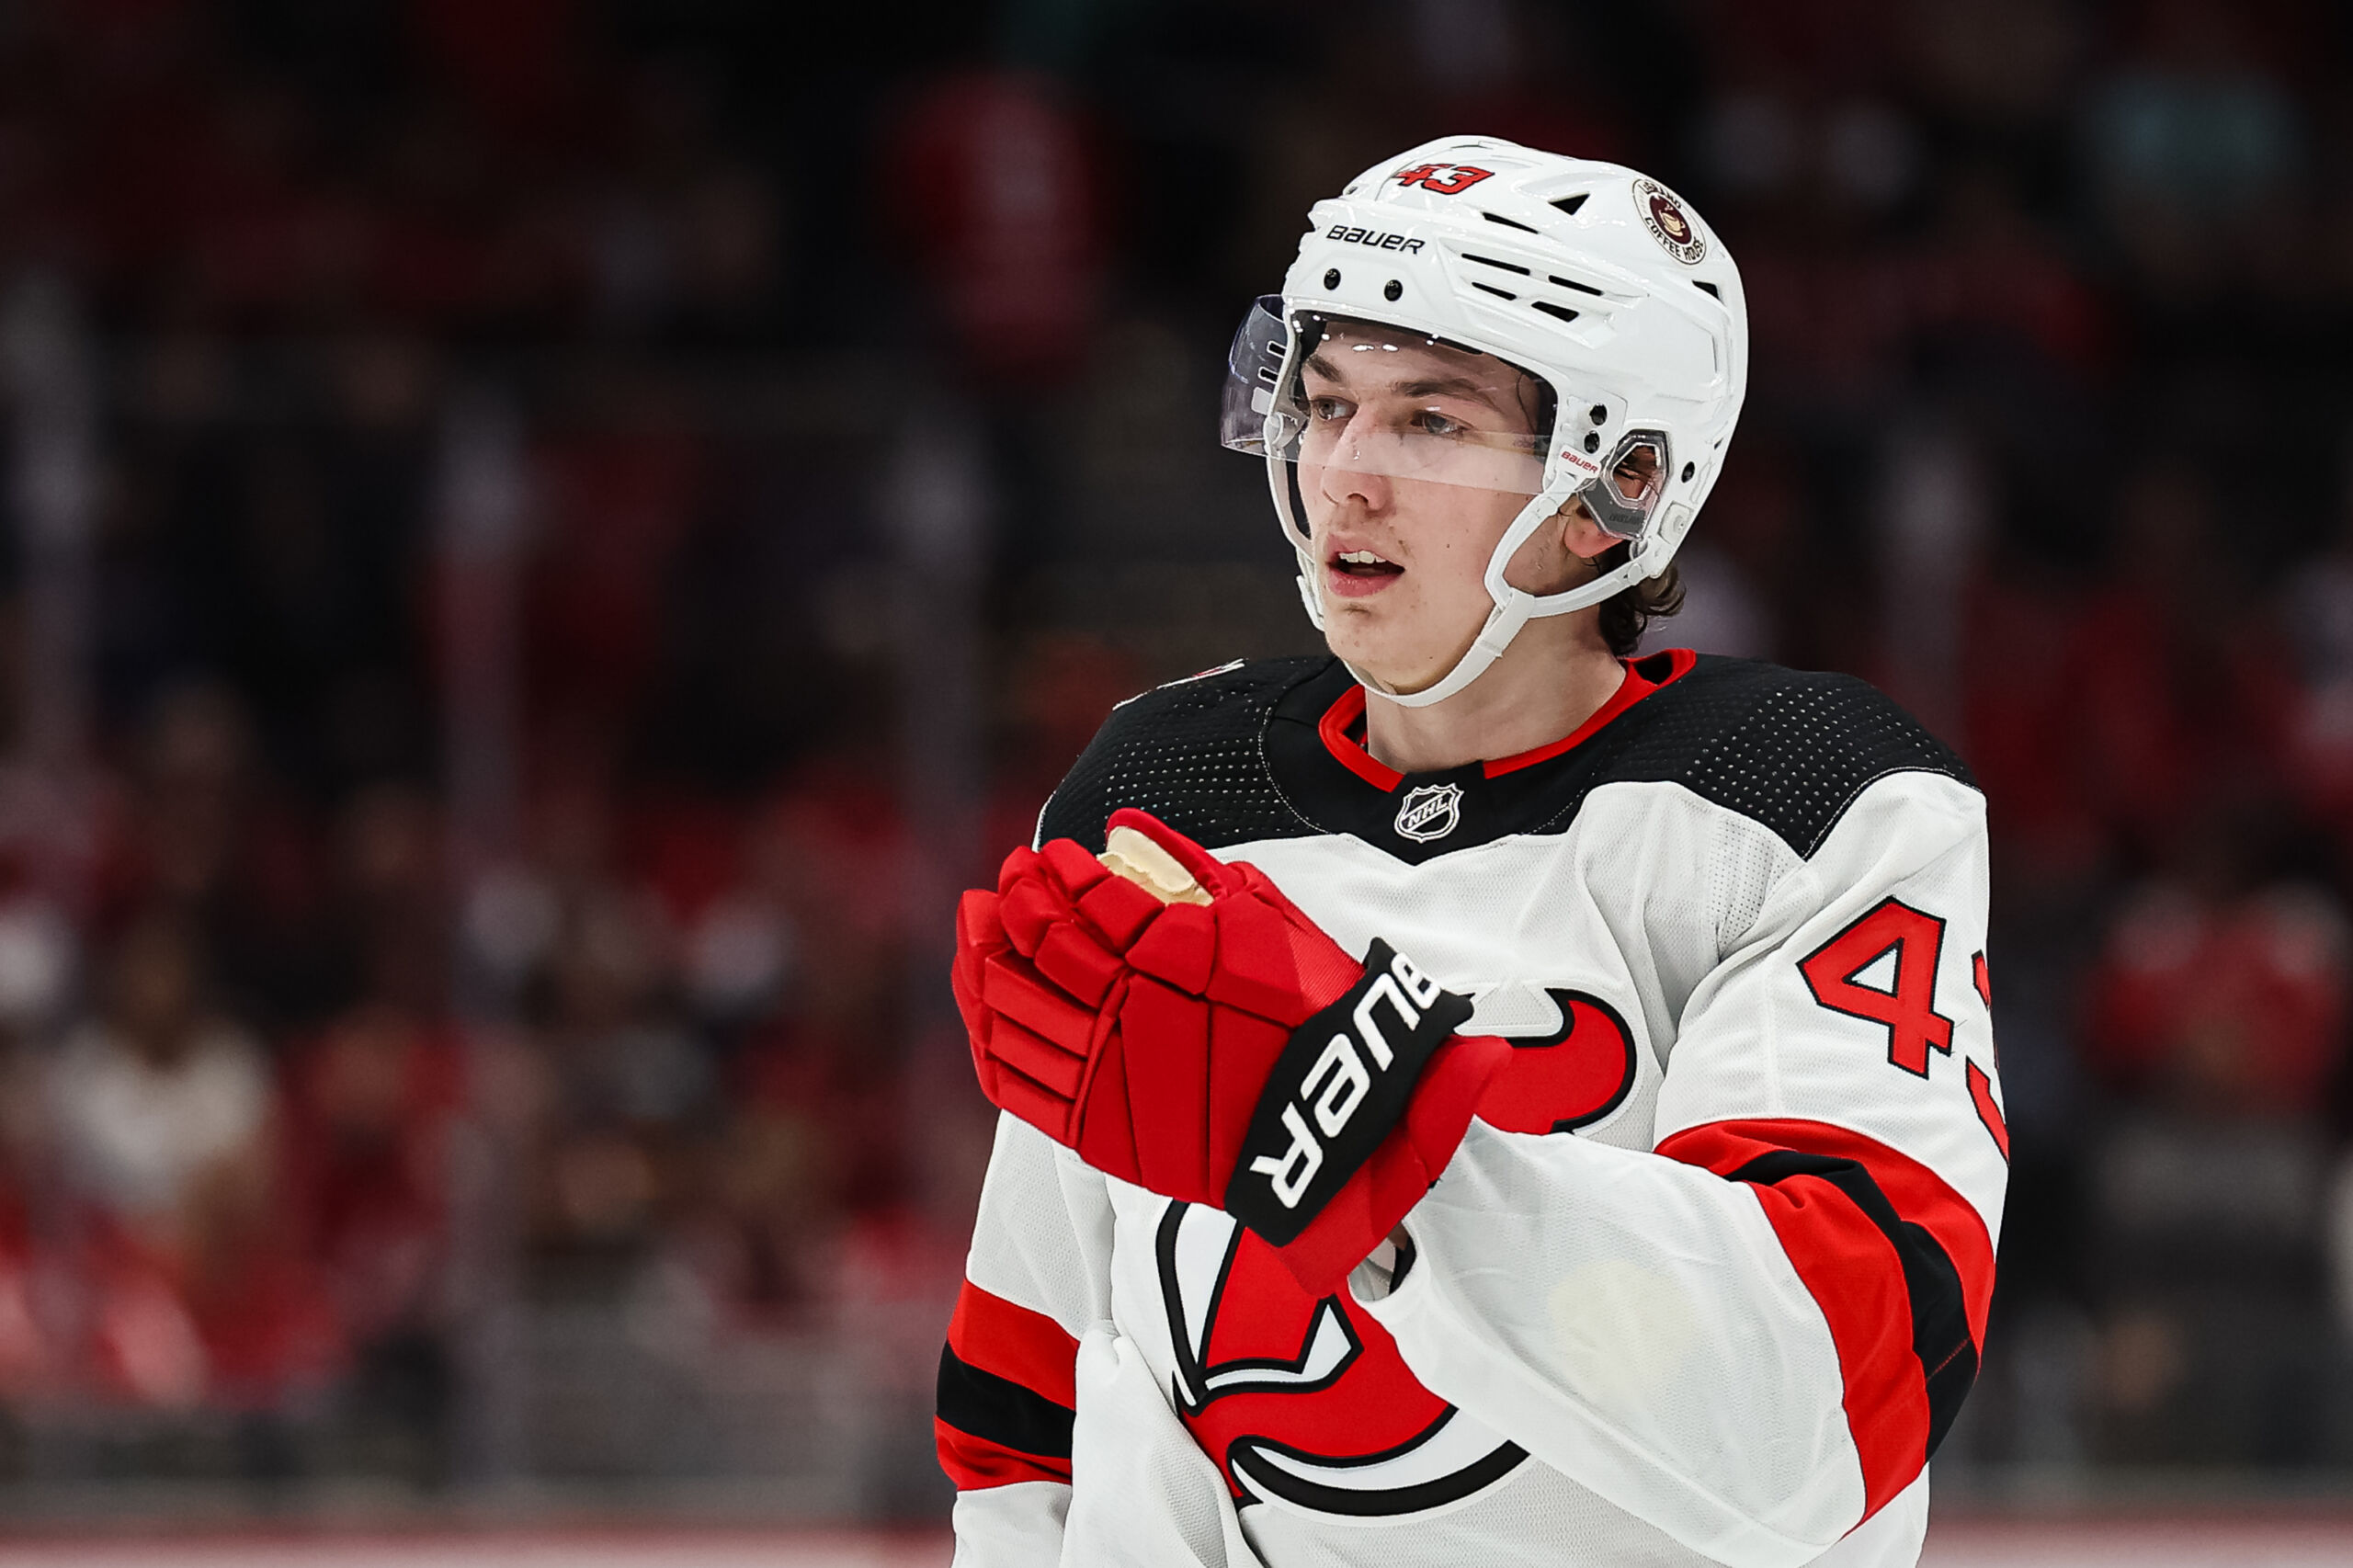 Luke Hughes signs with the New Jersey Devils